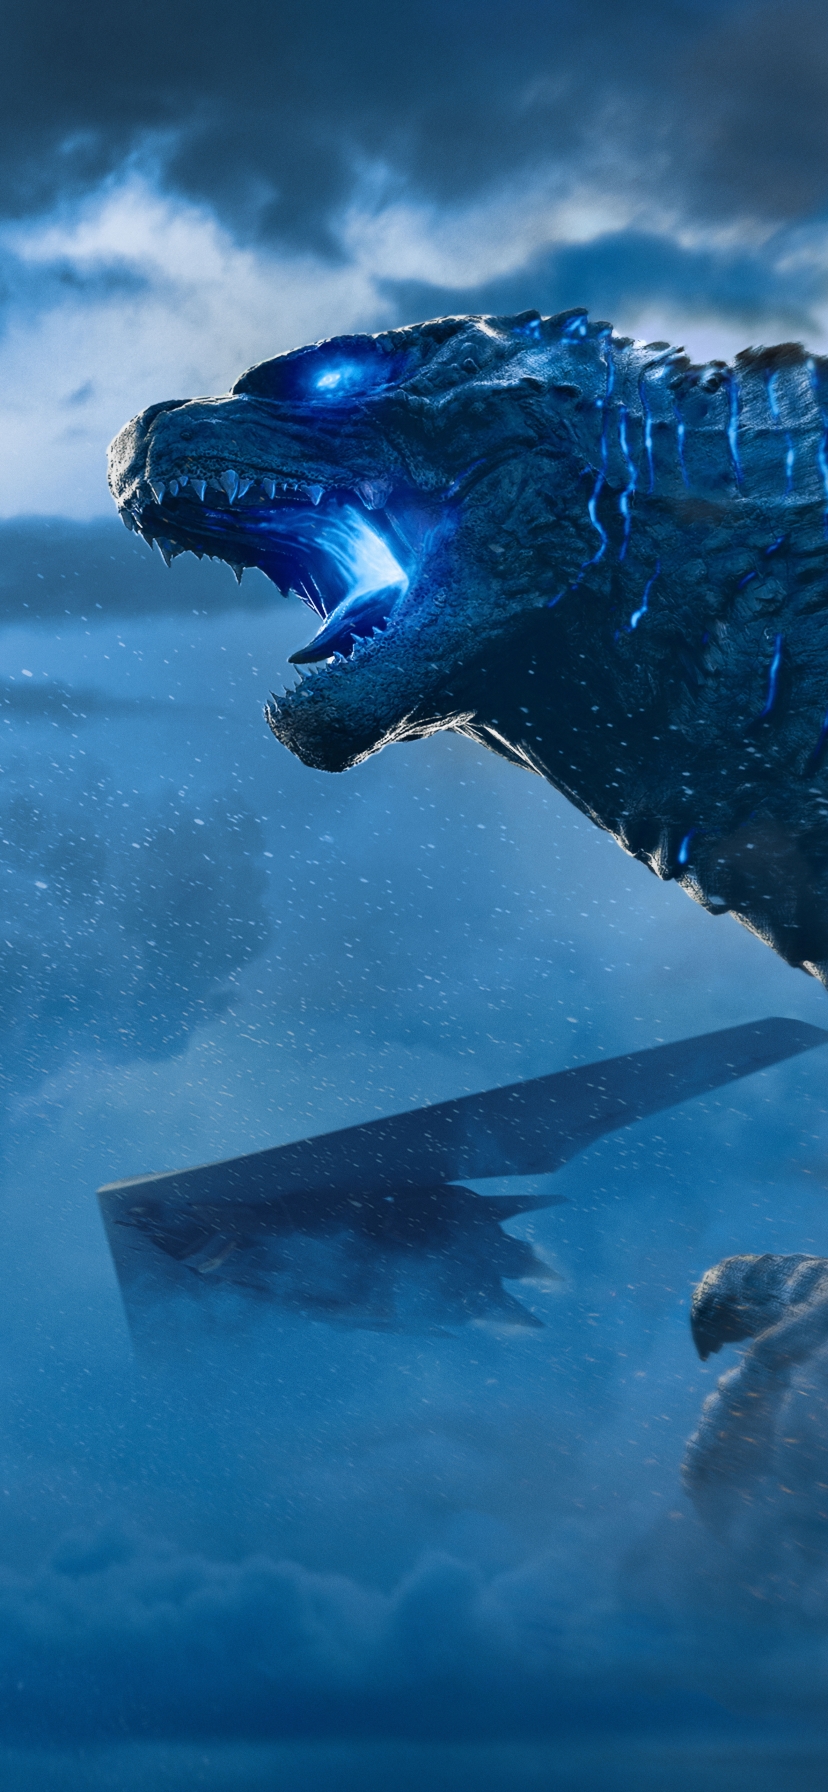 Godzilla: King of the Monsters Phone Wallpaper